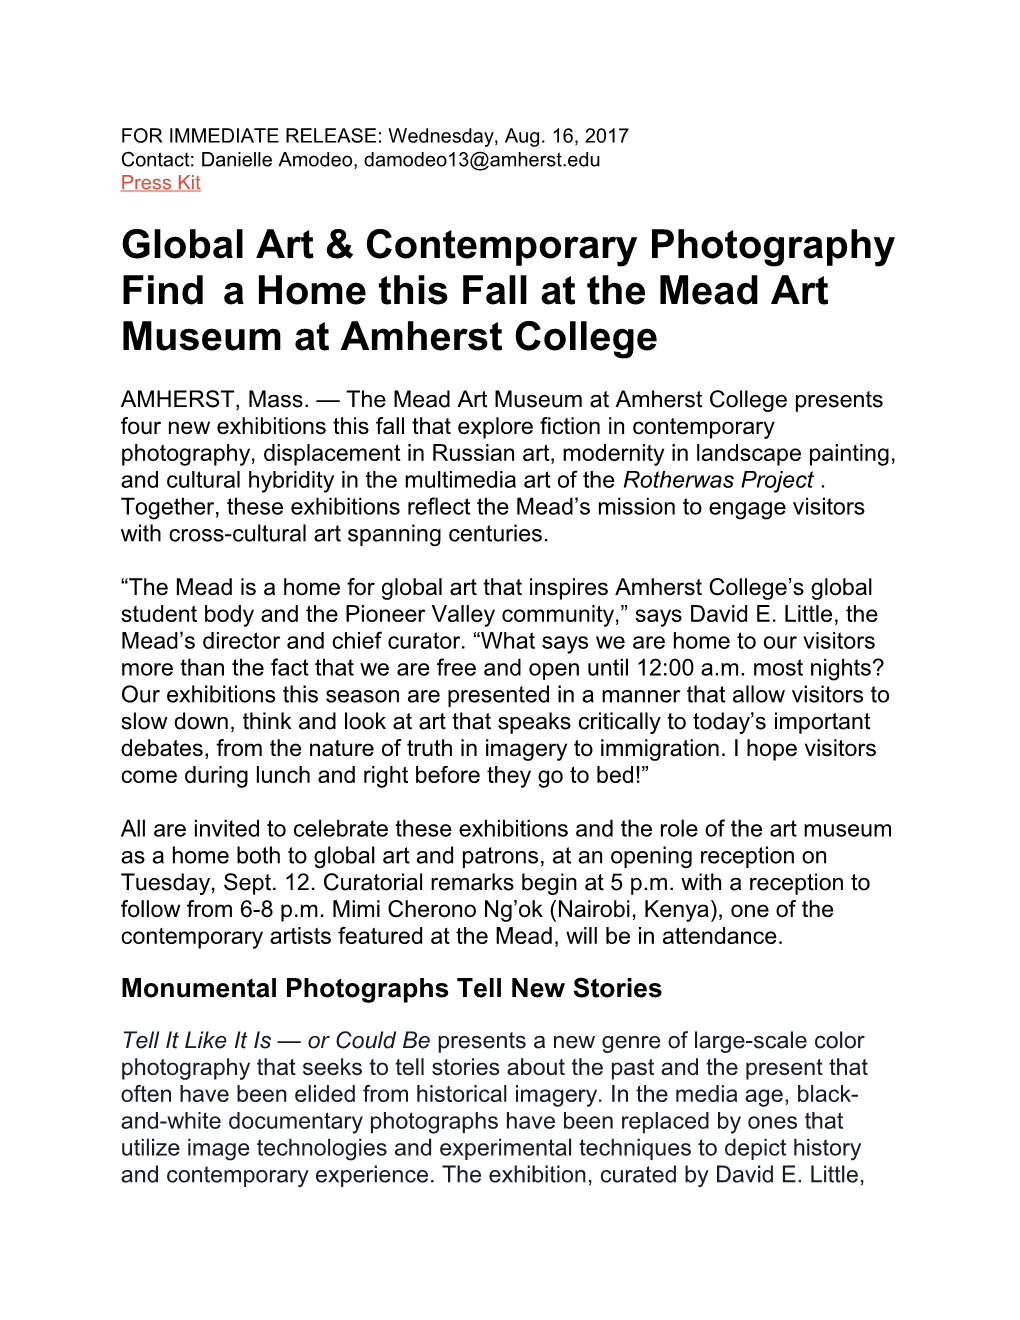 Global Art & Contemporary Photography Finda Home This Fall at the Mead Art Museum at Amherst